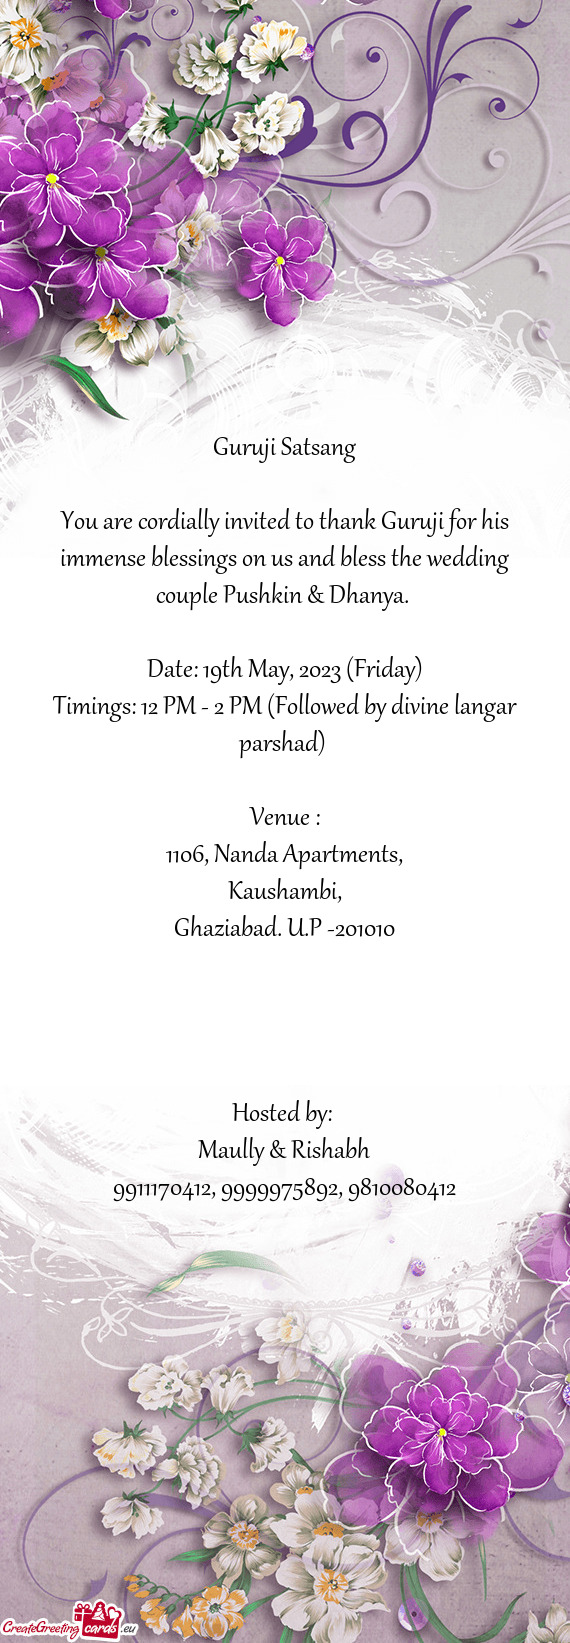 You are cordially invited to thank Guruji for his immense blessings on us and bless the wedding coup